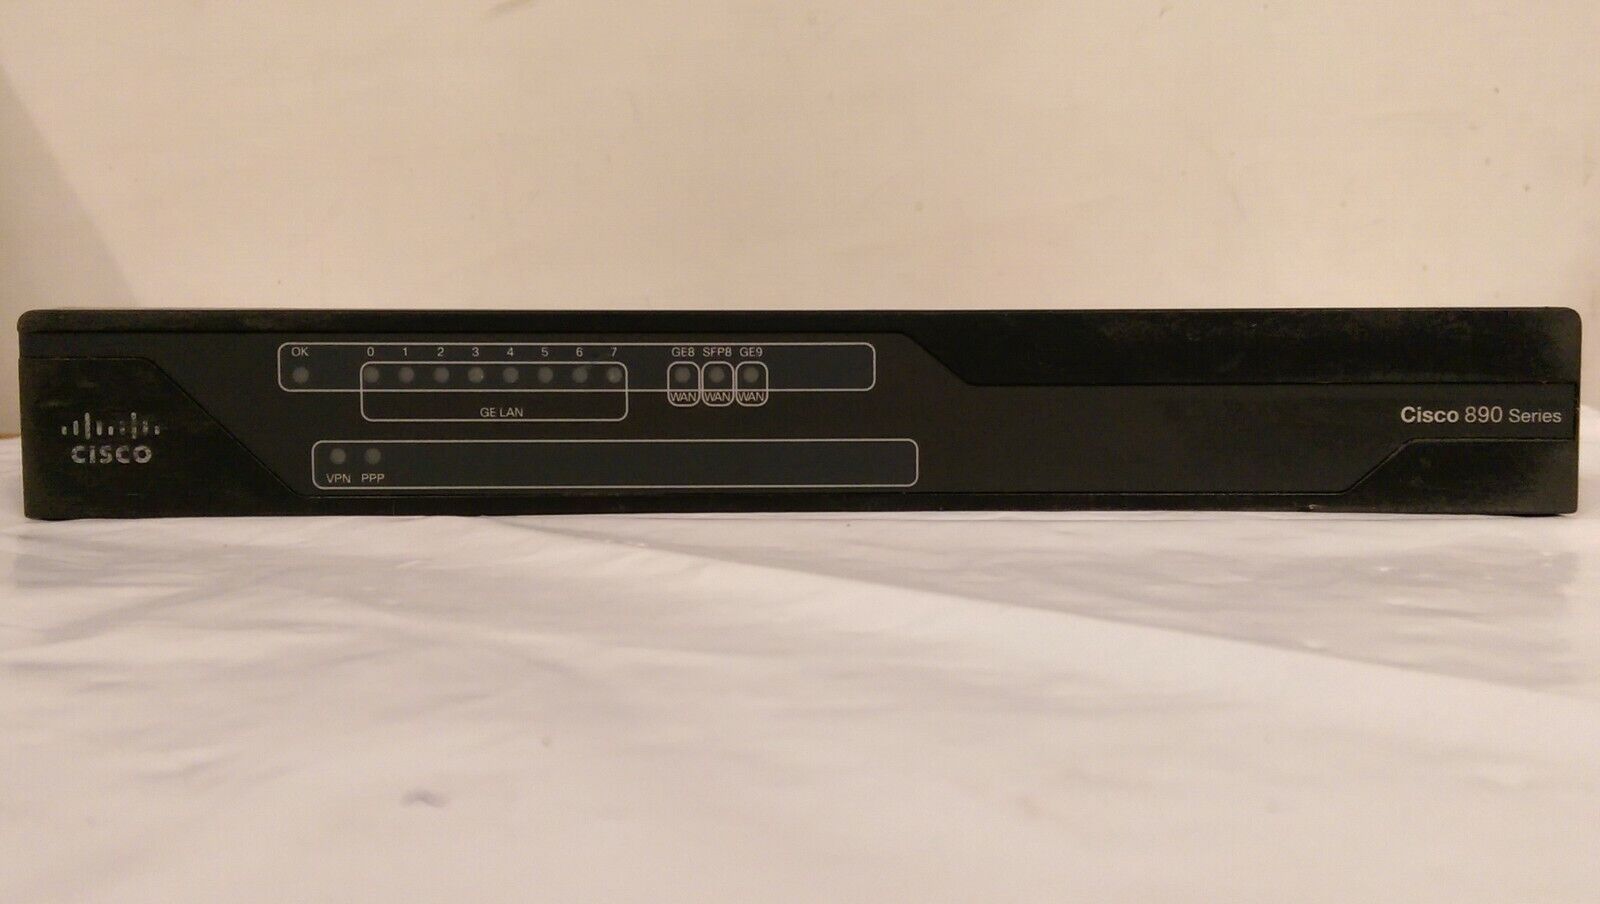 Cisco C892FSP-K9-V02 (892FSP) Port Wired Security Router (No Power Cord) -Used-